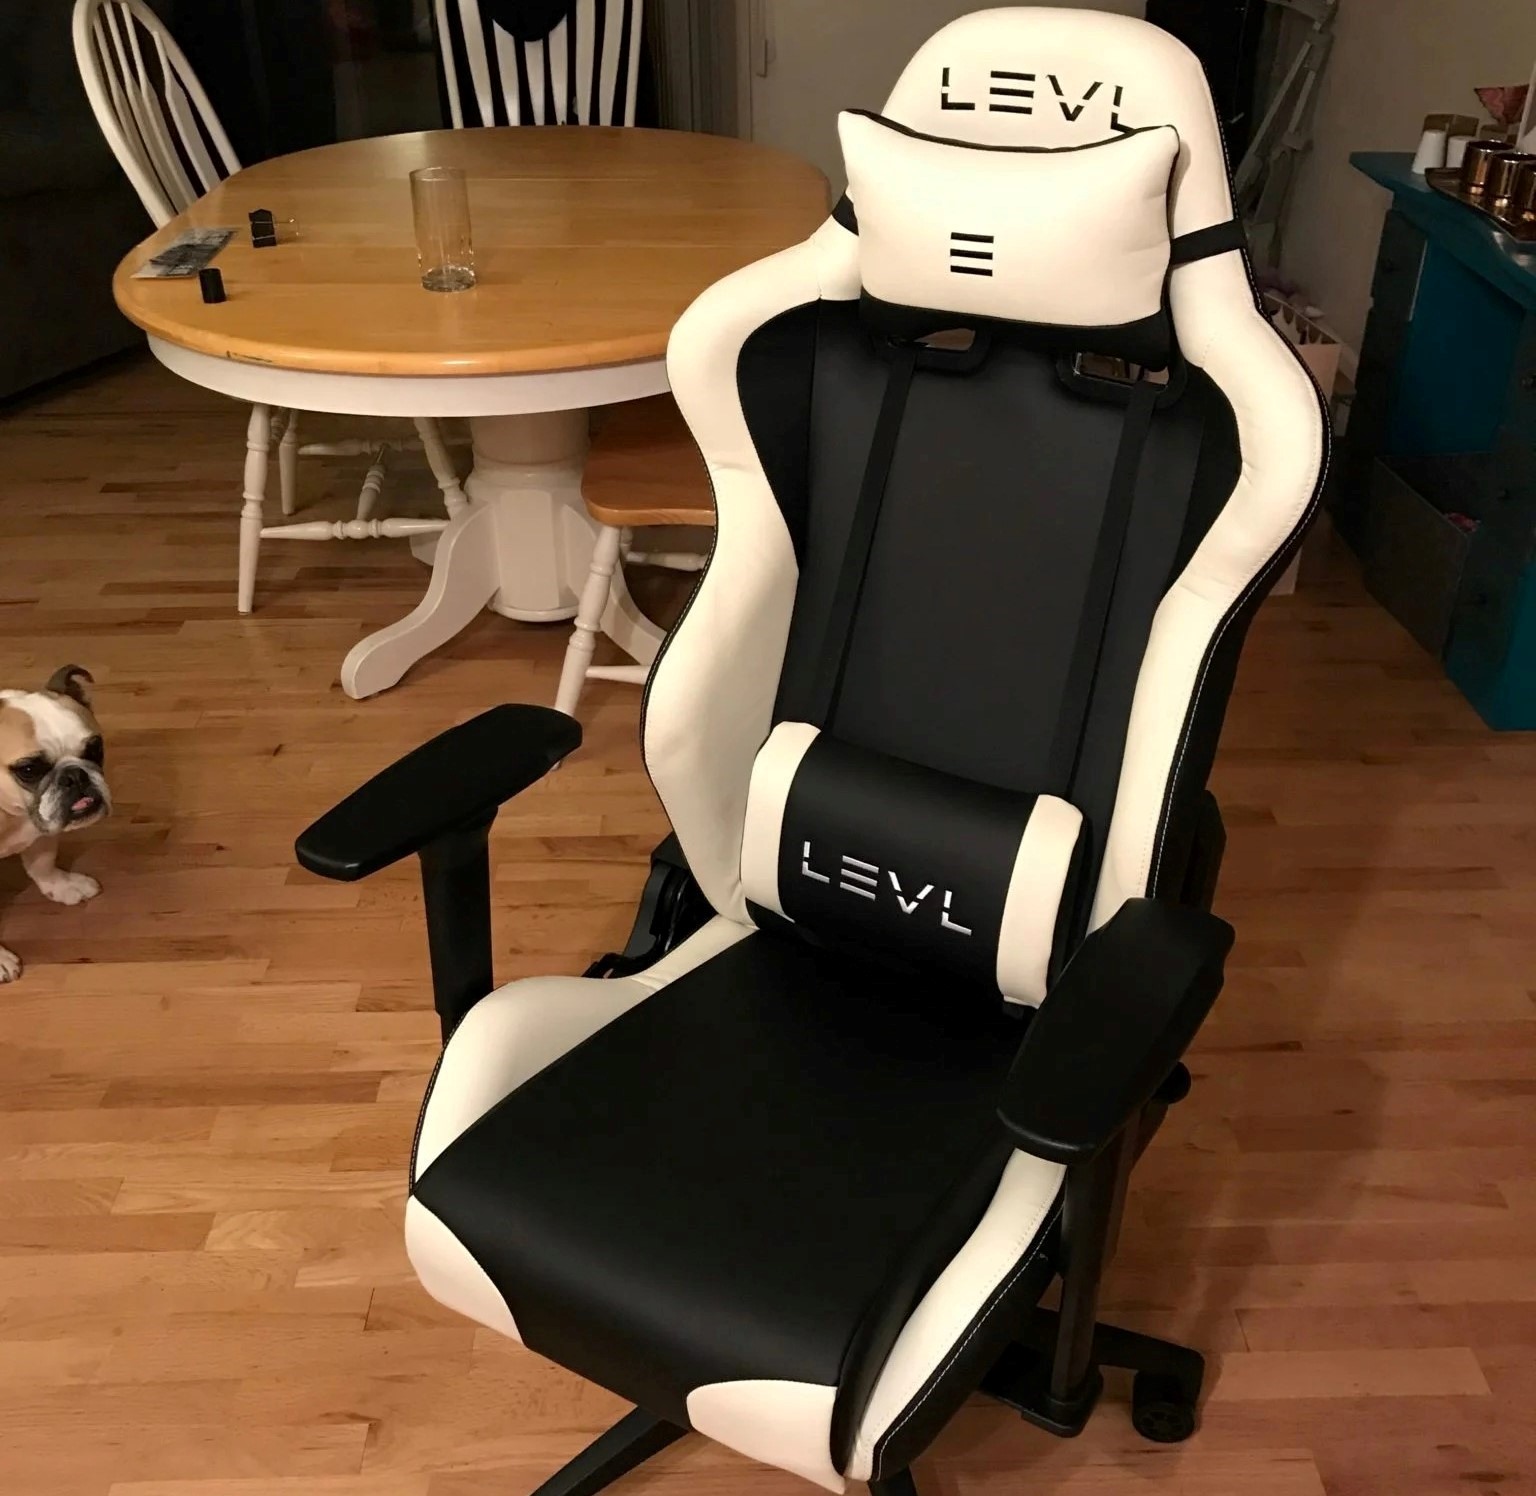 12 Best Levl Gaming Chair for 2023